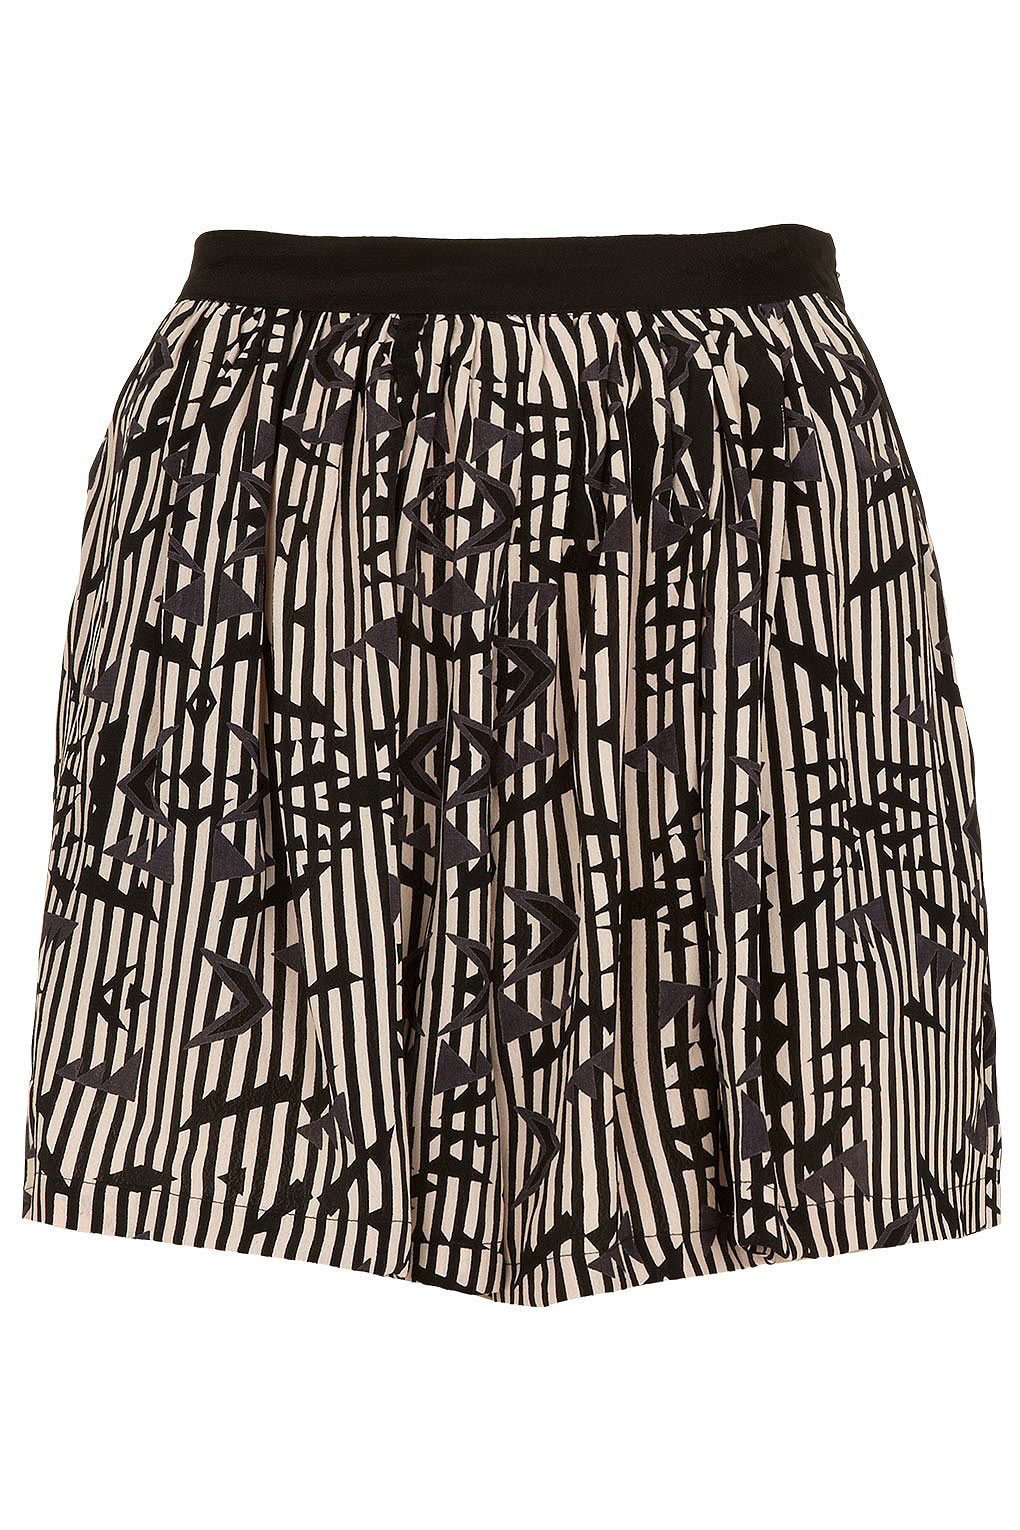 TOPSHOP Ikat Printed Culotte Shorts in Black - Lyst